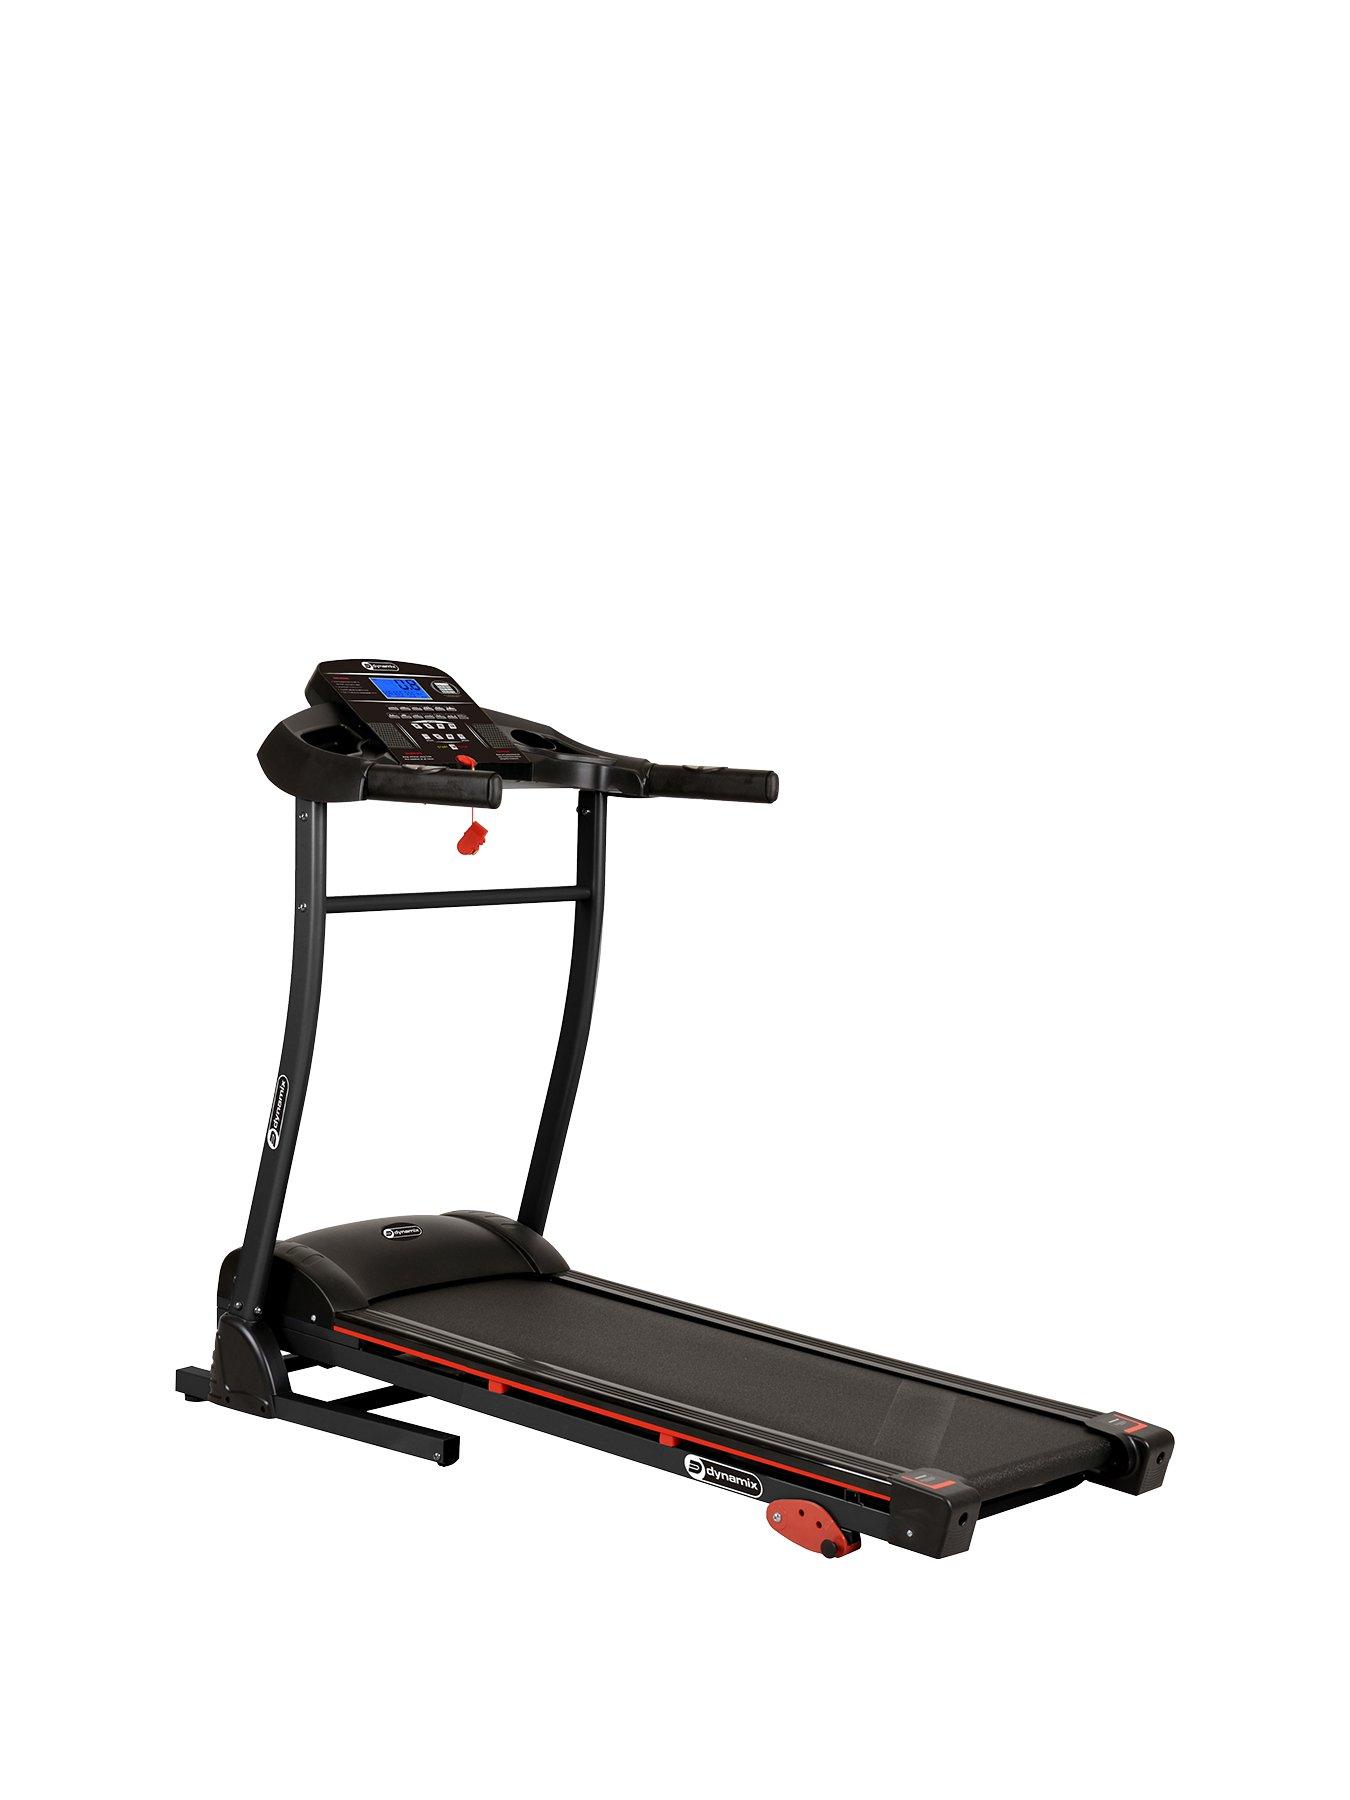 Home Gym Equipment, Exercise Equipment